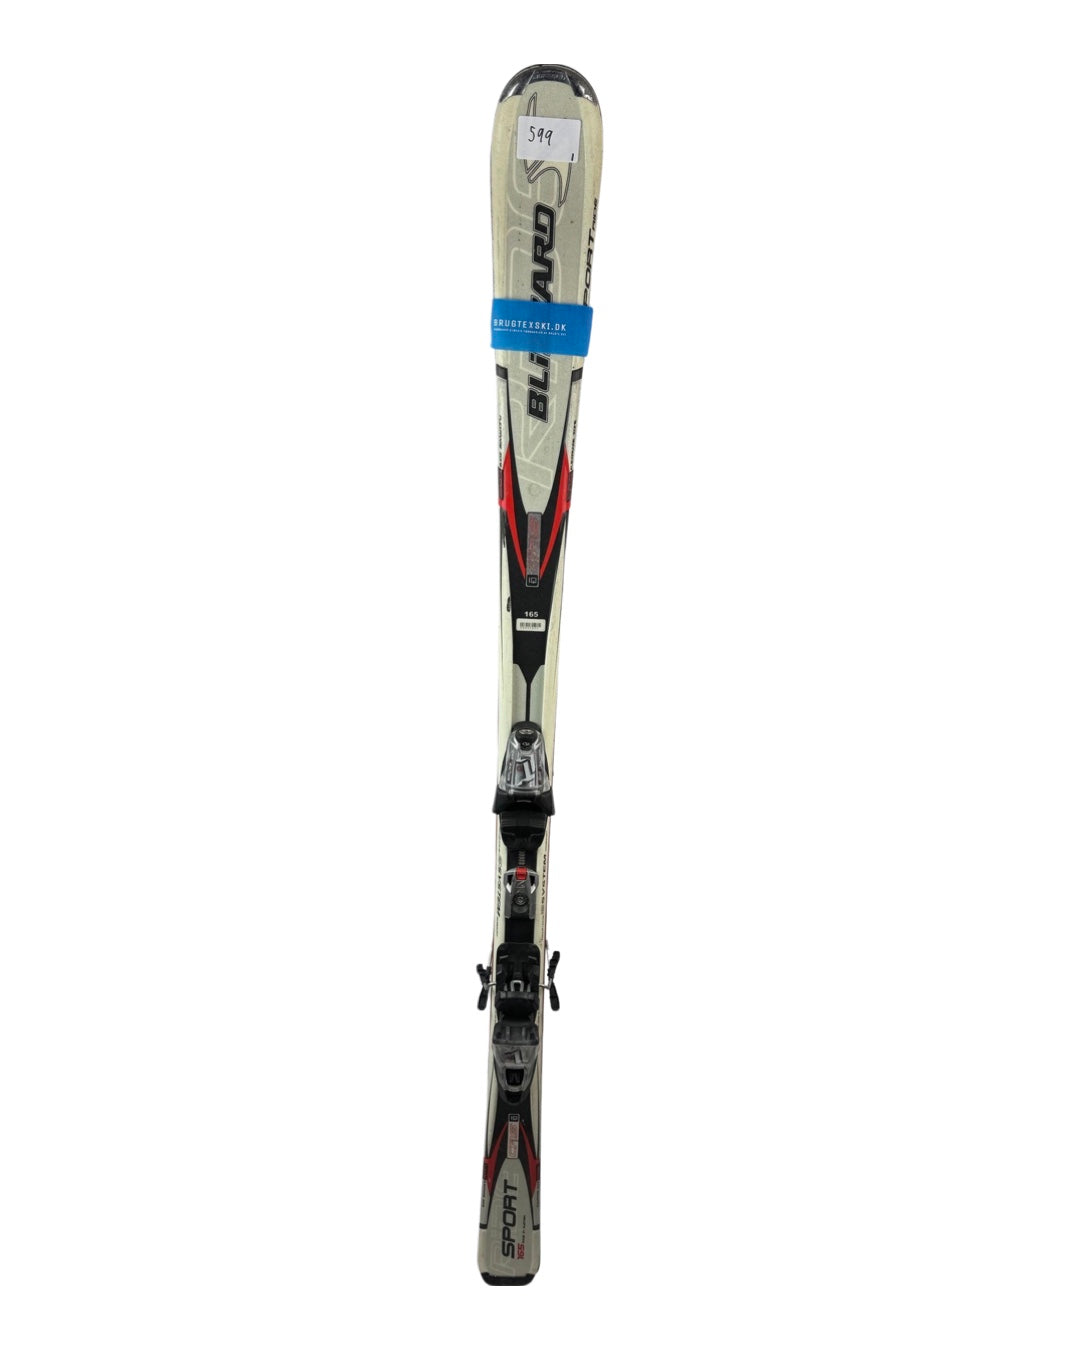 Adult skis - mixed 599